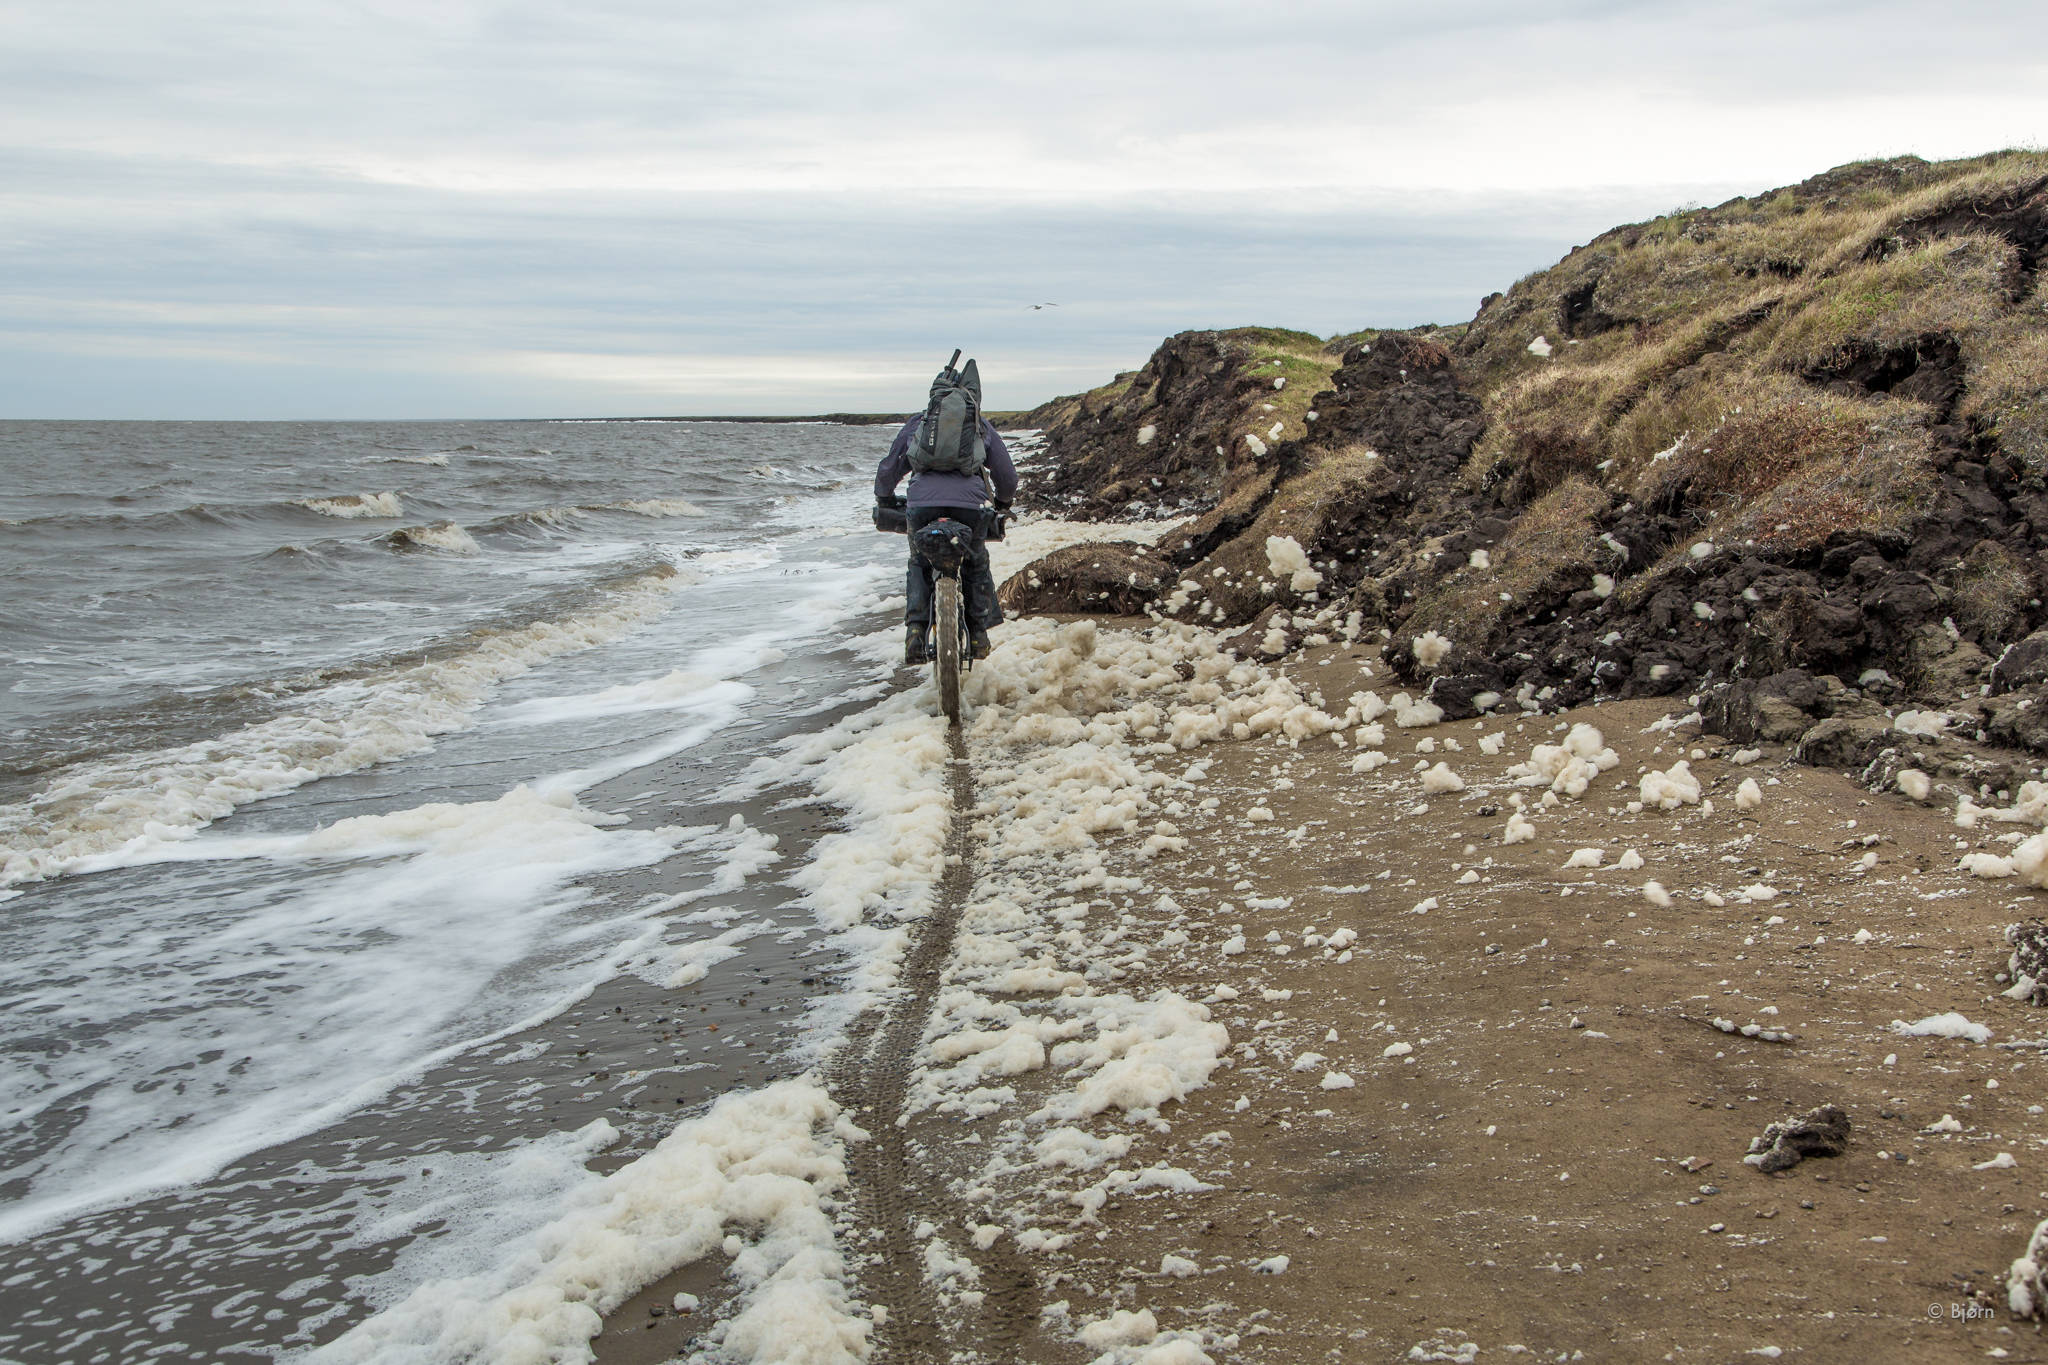 Some sections of beach were so narrow the fat bikers had to skirt the surf and sea foam. (Photo courtesy Bjørn Olson)